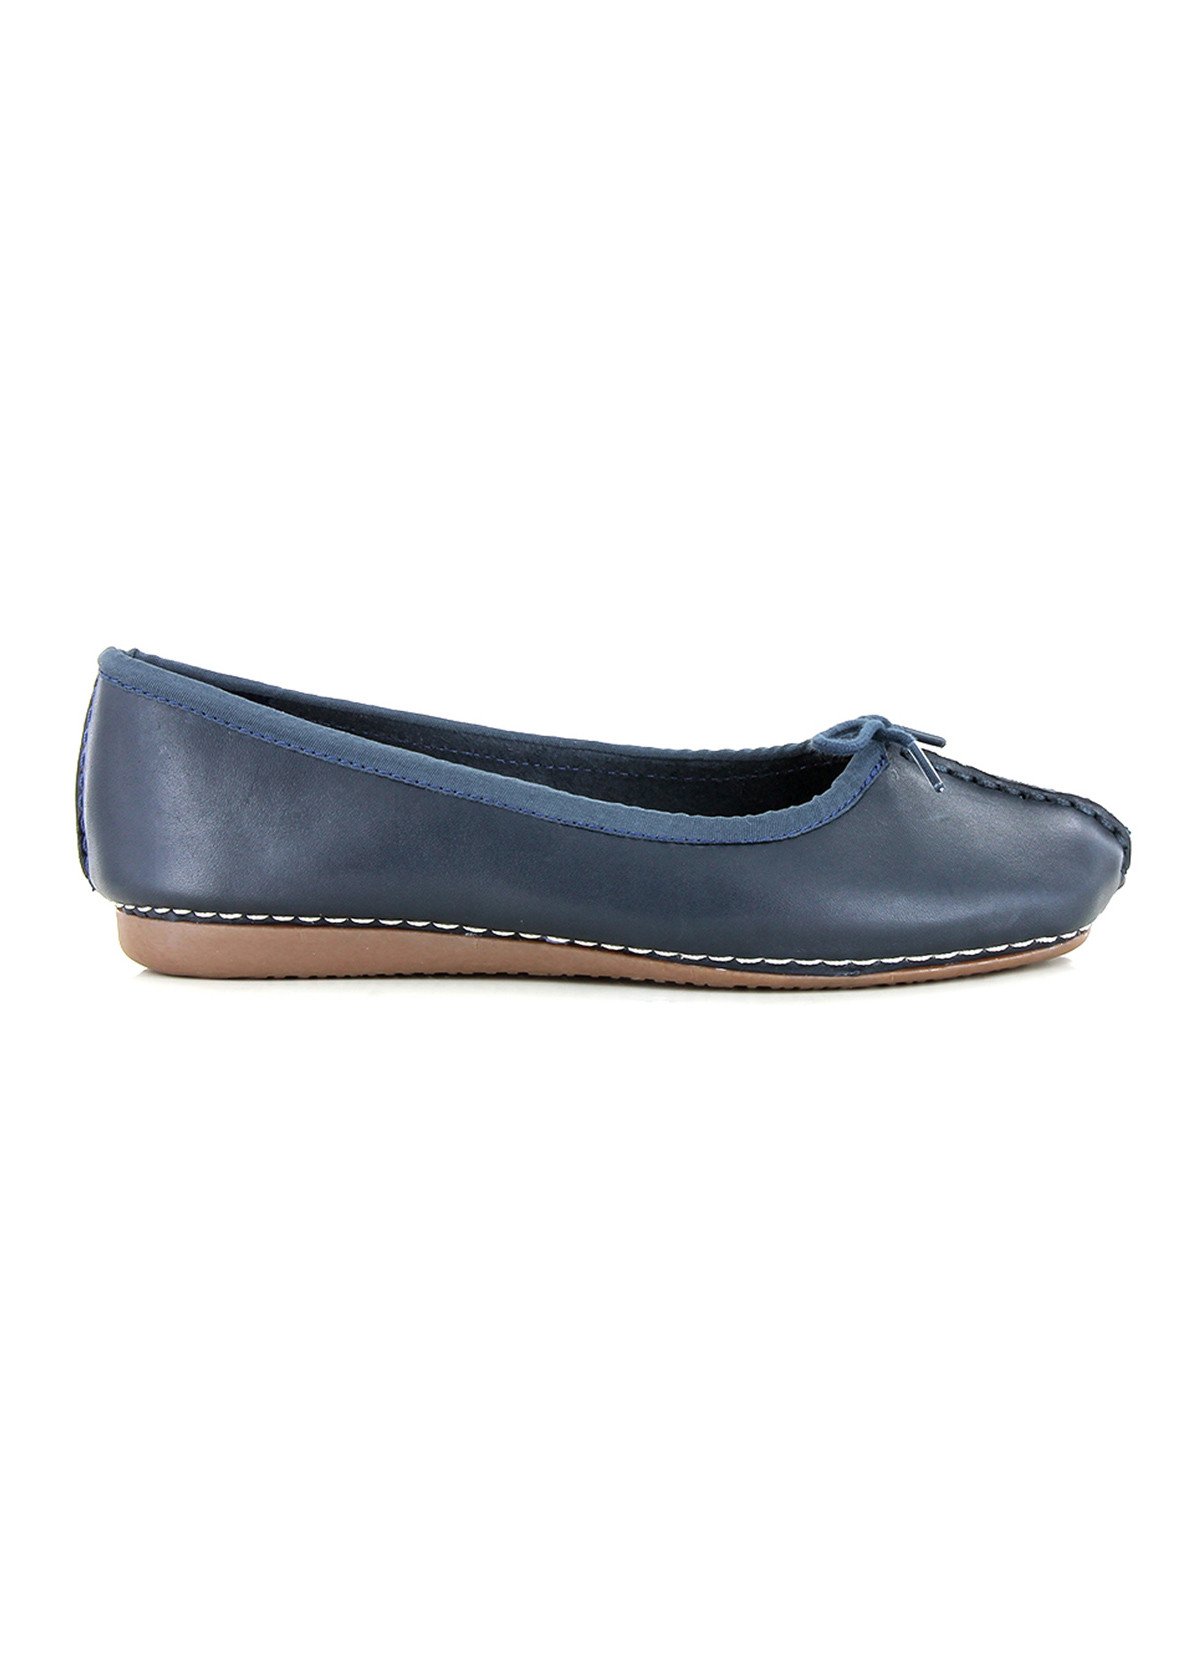 Clarks FRECKLE ICE NAVY